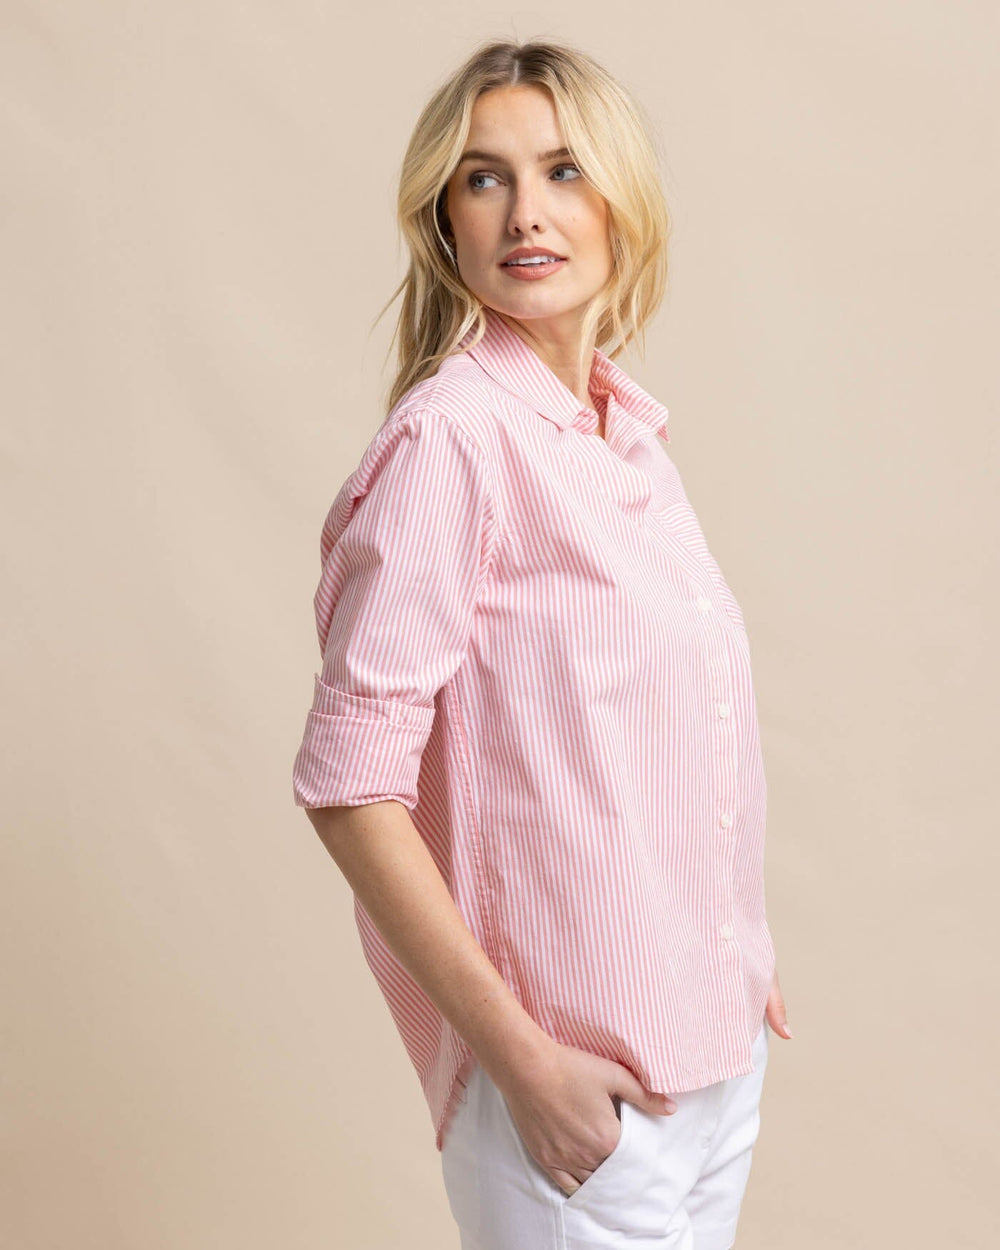 The front view of the Southern Tide Katherine Stripe Shirt by Southern Tide - Conch Shell